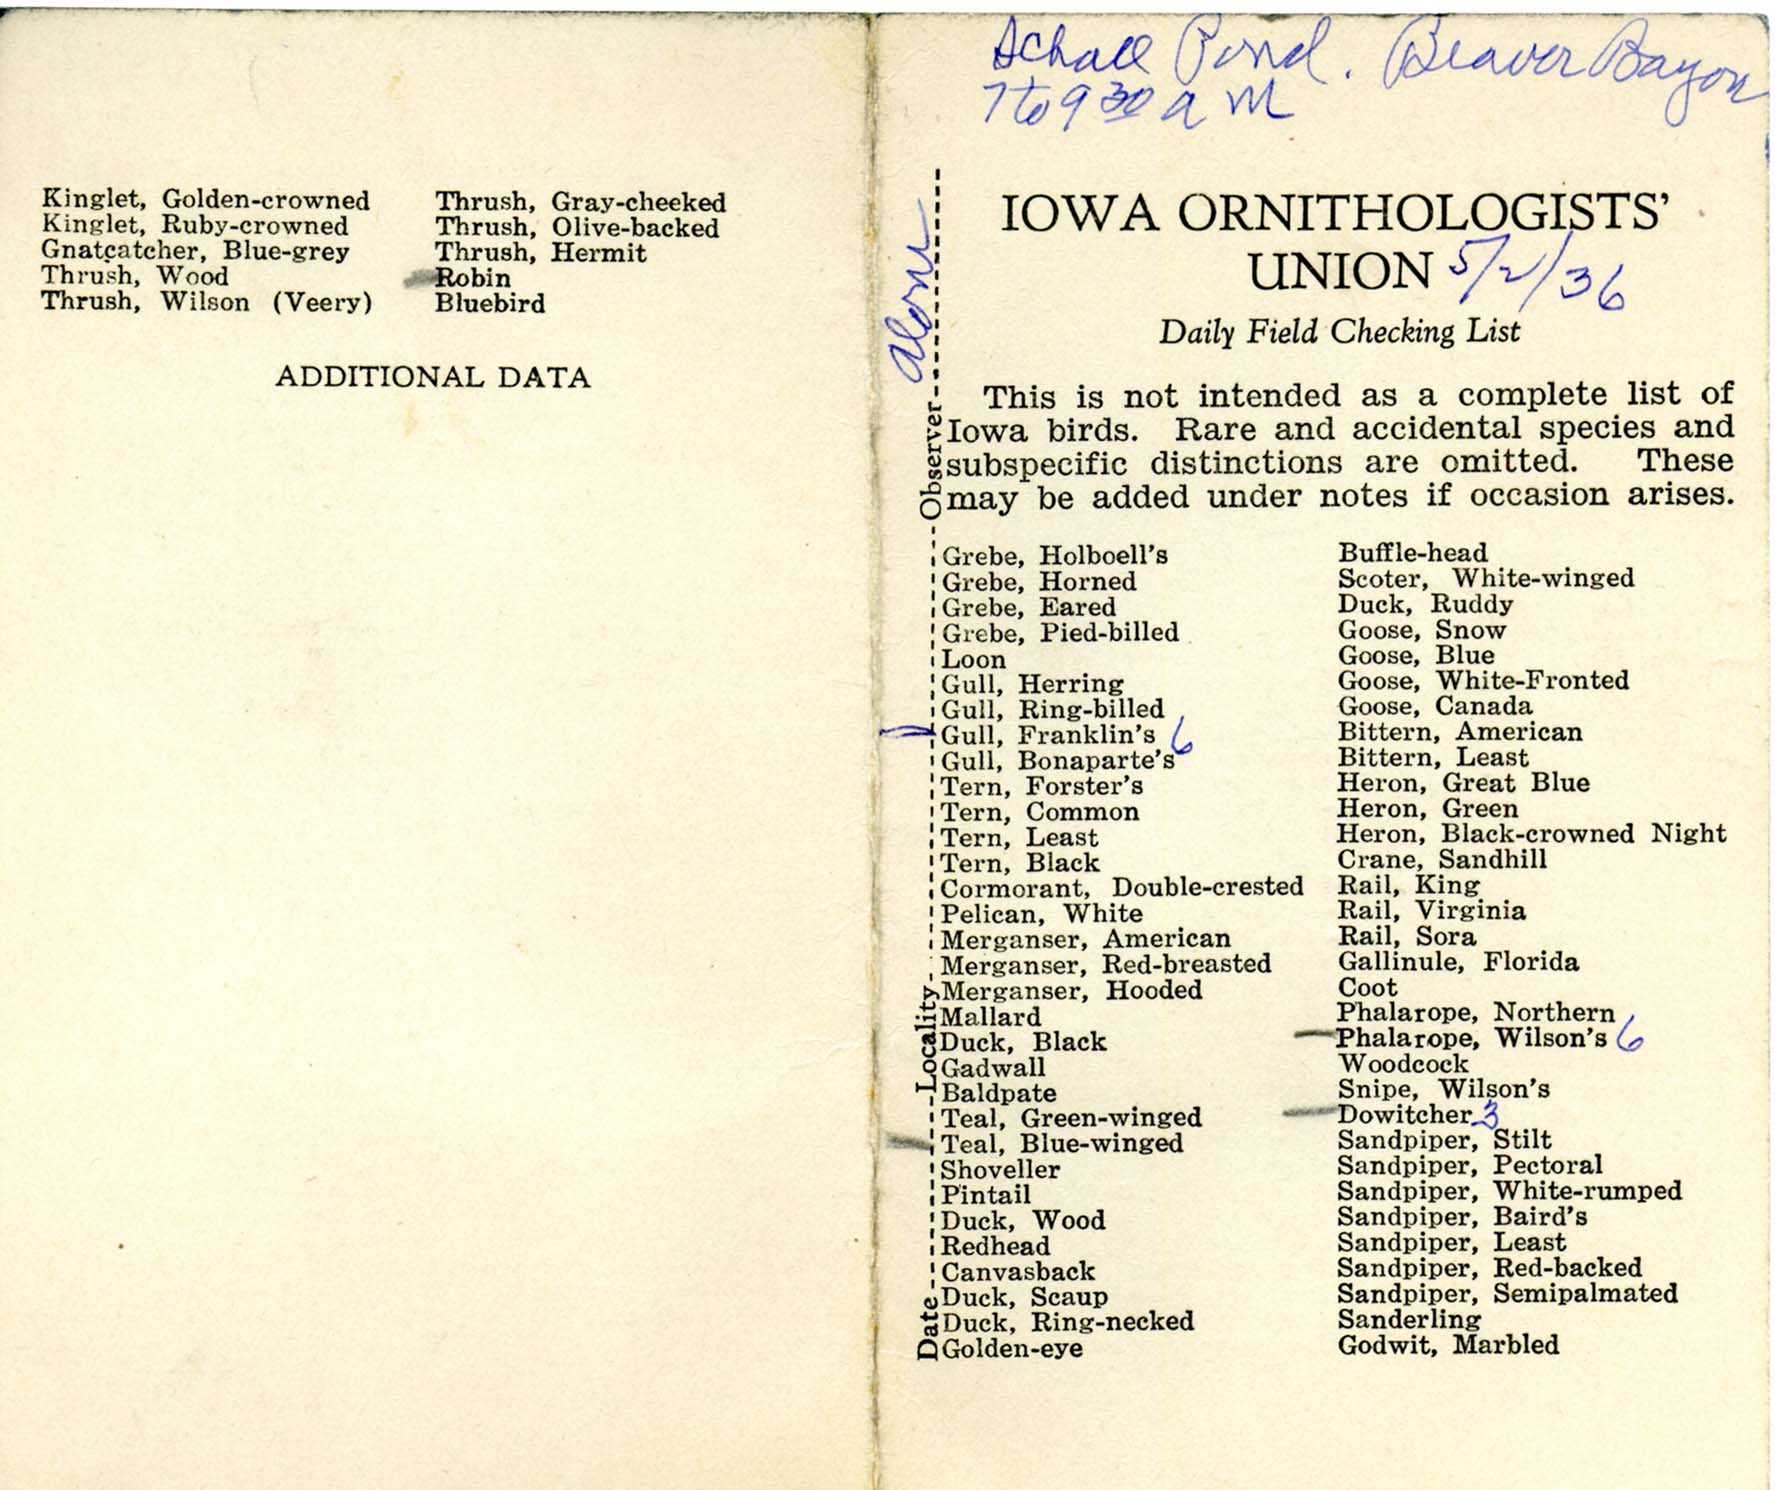 Daily field checking list by Walter Rosene, May 2, 1936